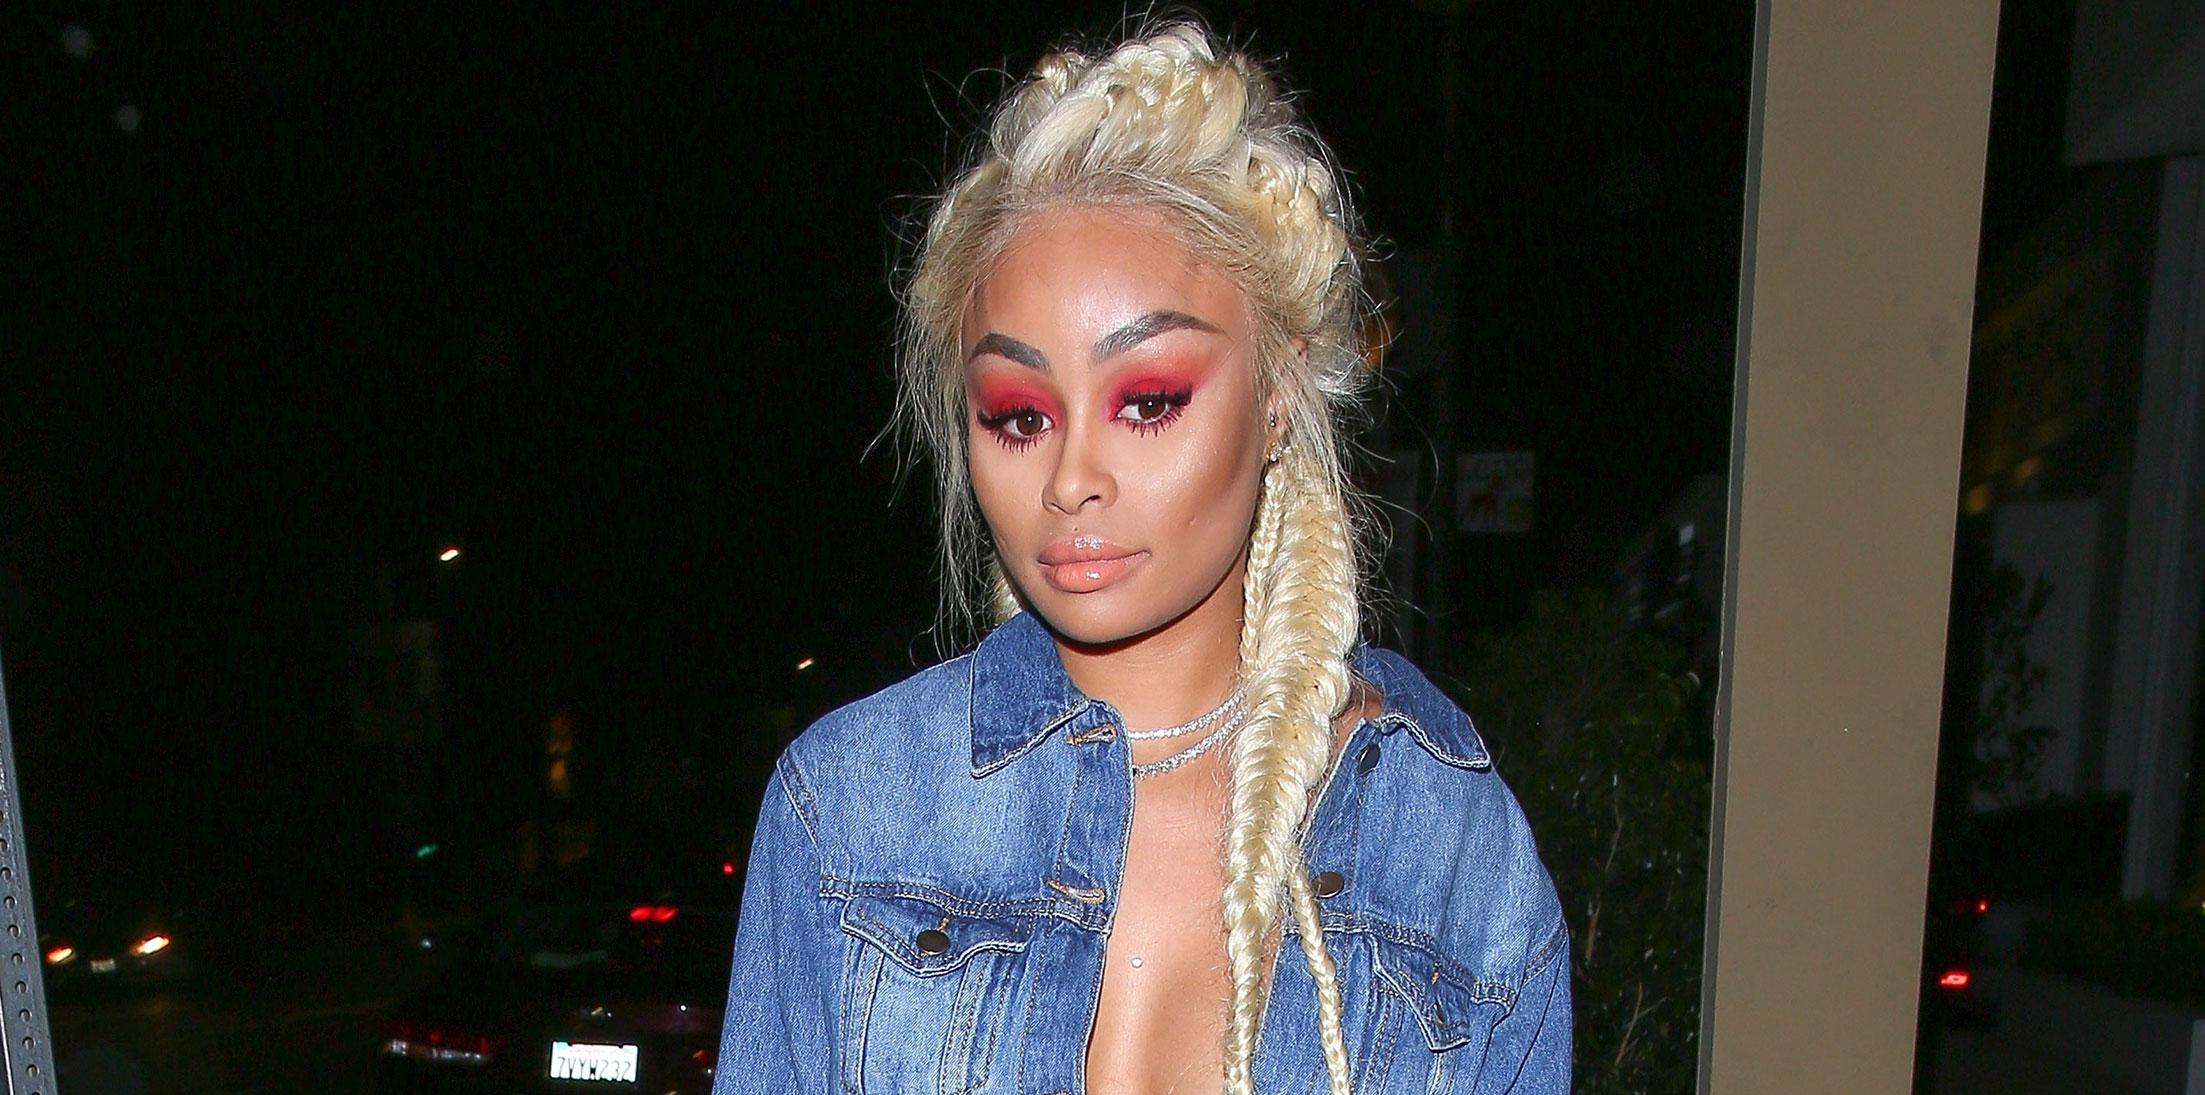 [VIDEO] Blac Chyna’s Attorney Admits He’s Investigating Legal Action